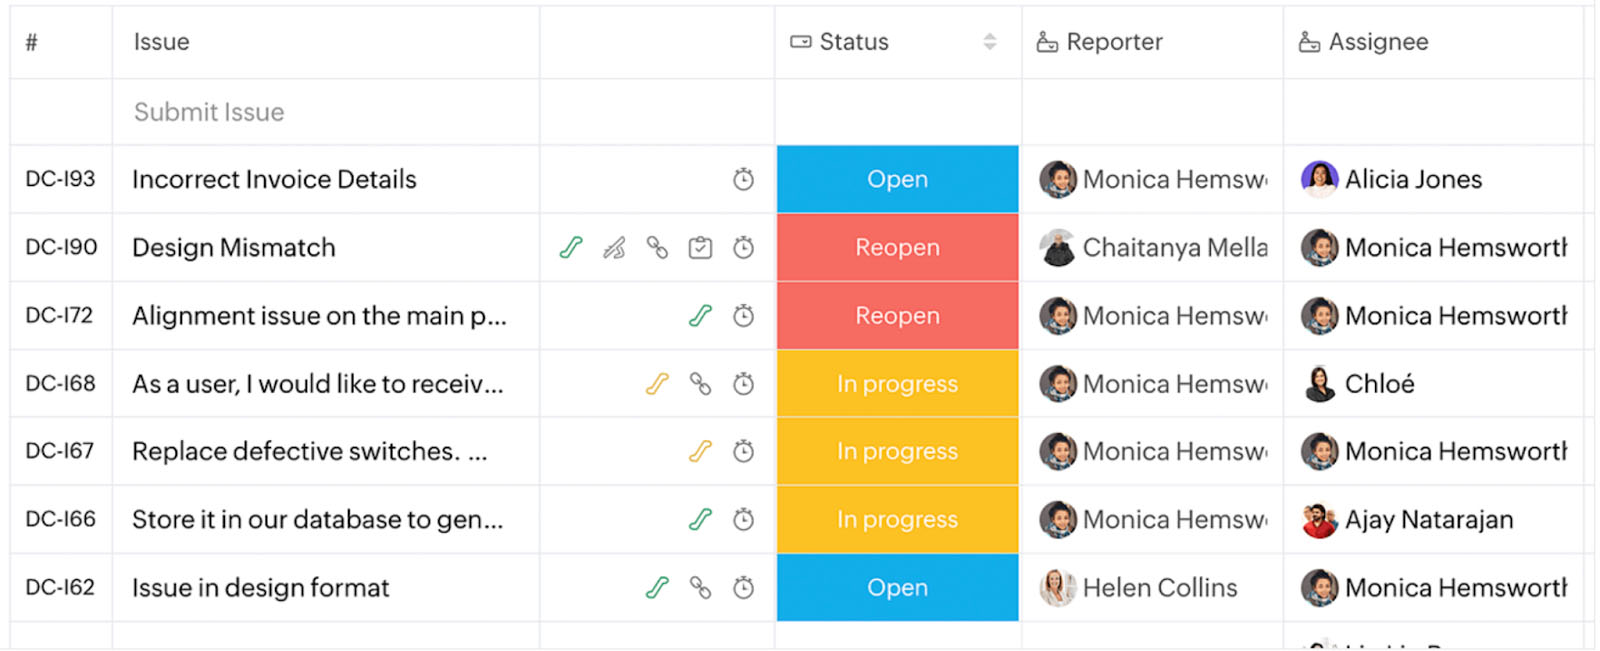 Zoho Projects issue tracking chart with columns for issue, status, reporter, and assignee.